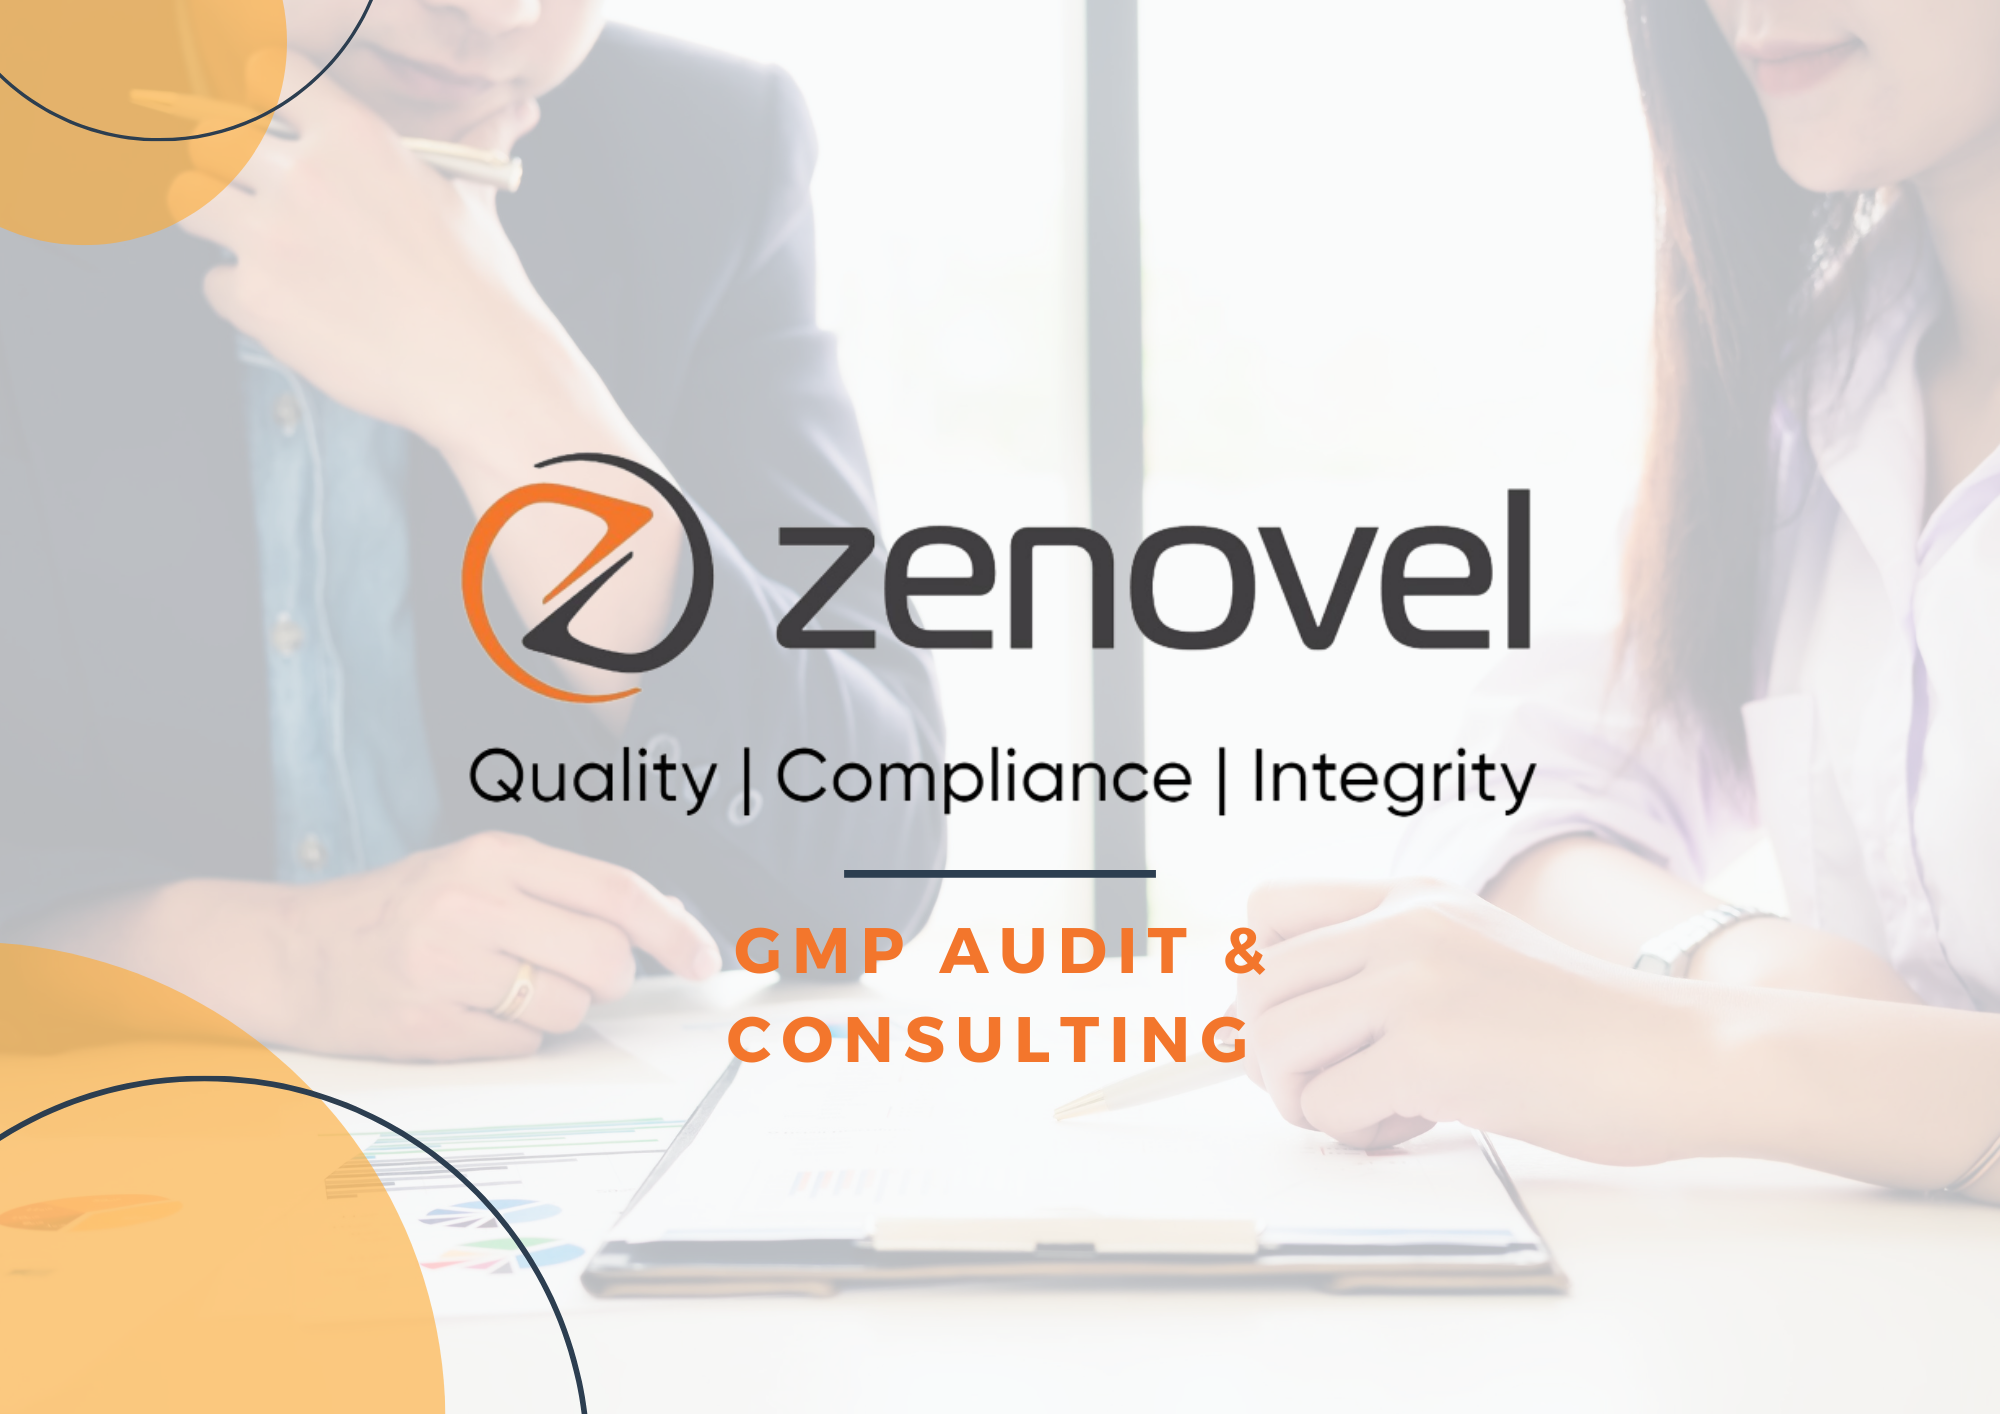 GMP Audit & Consulting Services